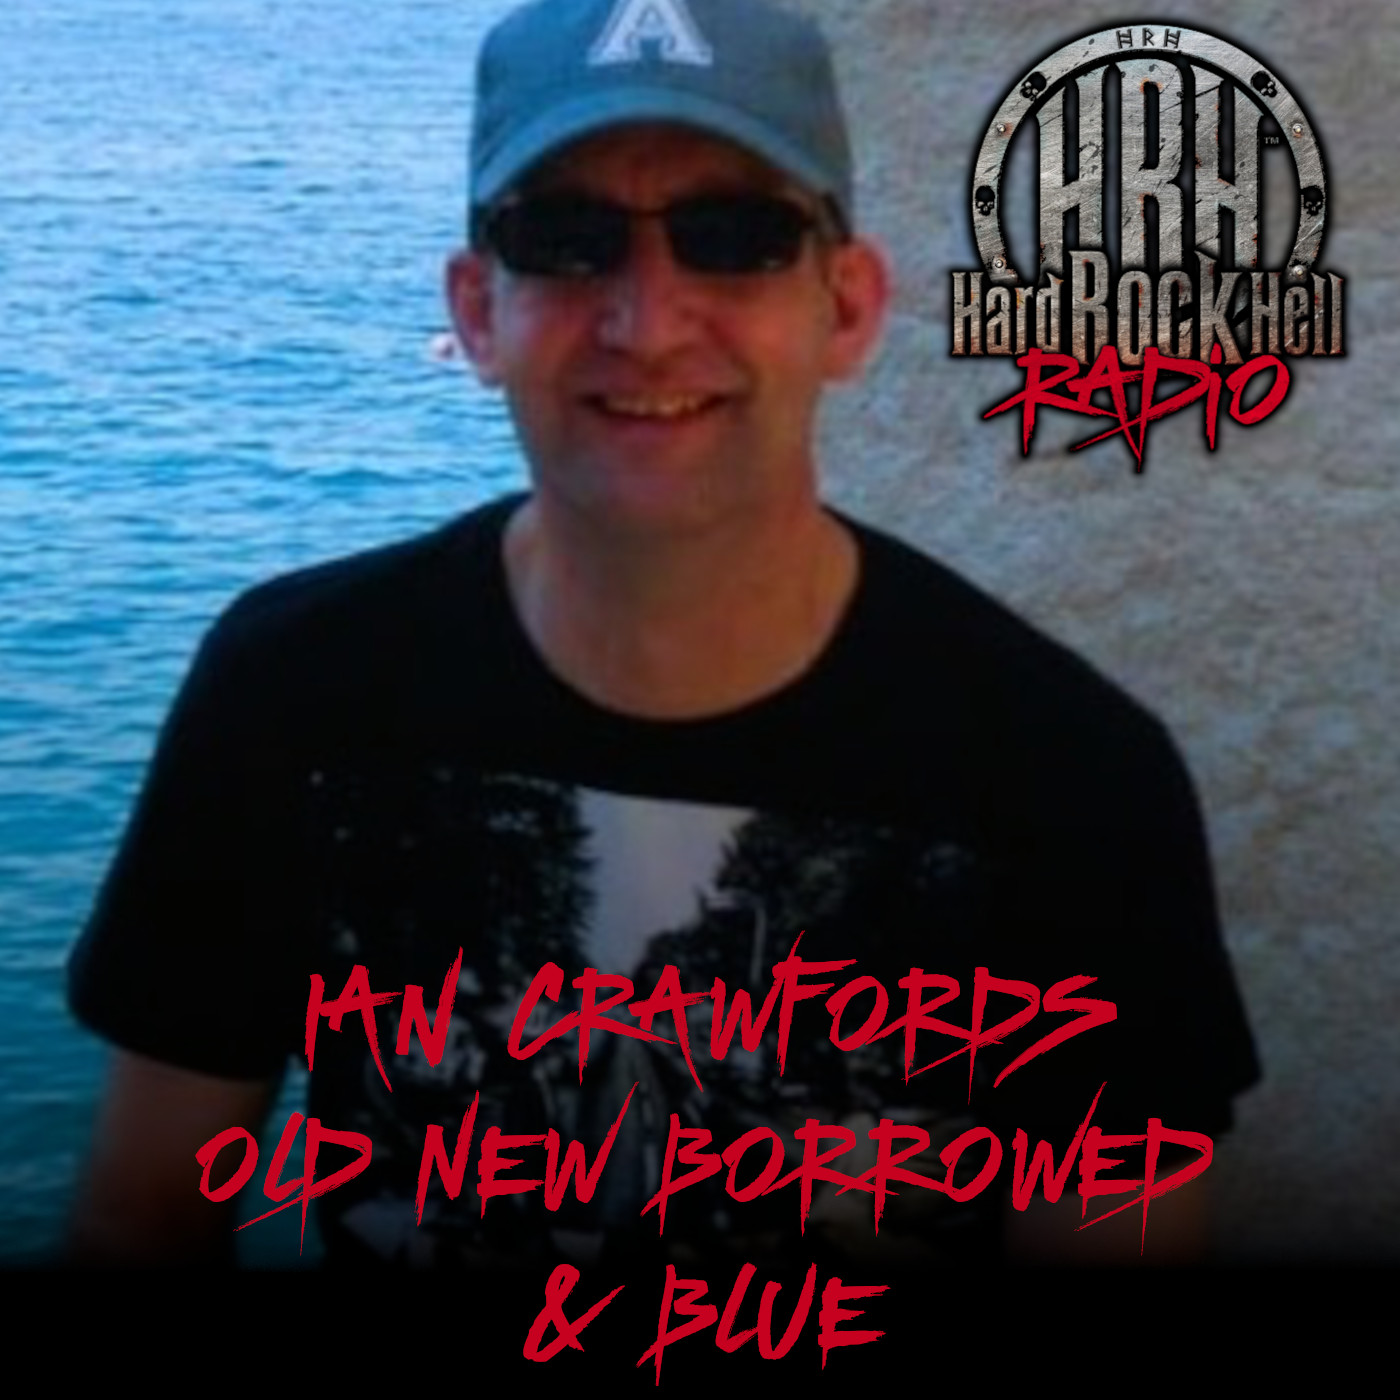 Ian Crawfords Old New Borrowed and Blue